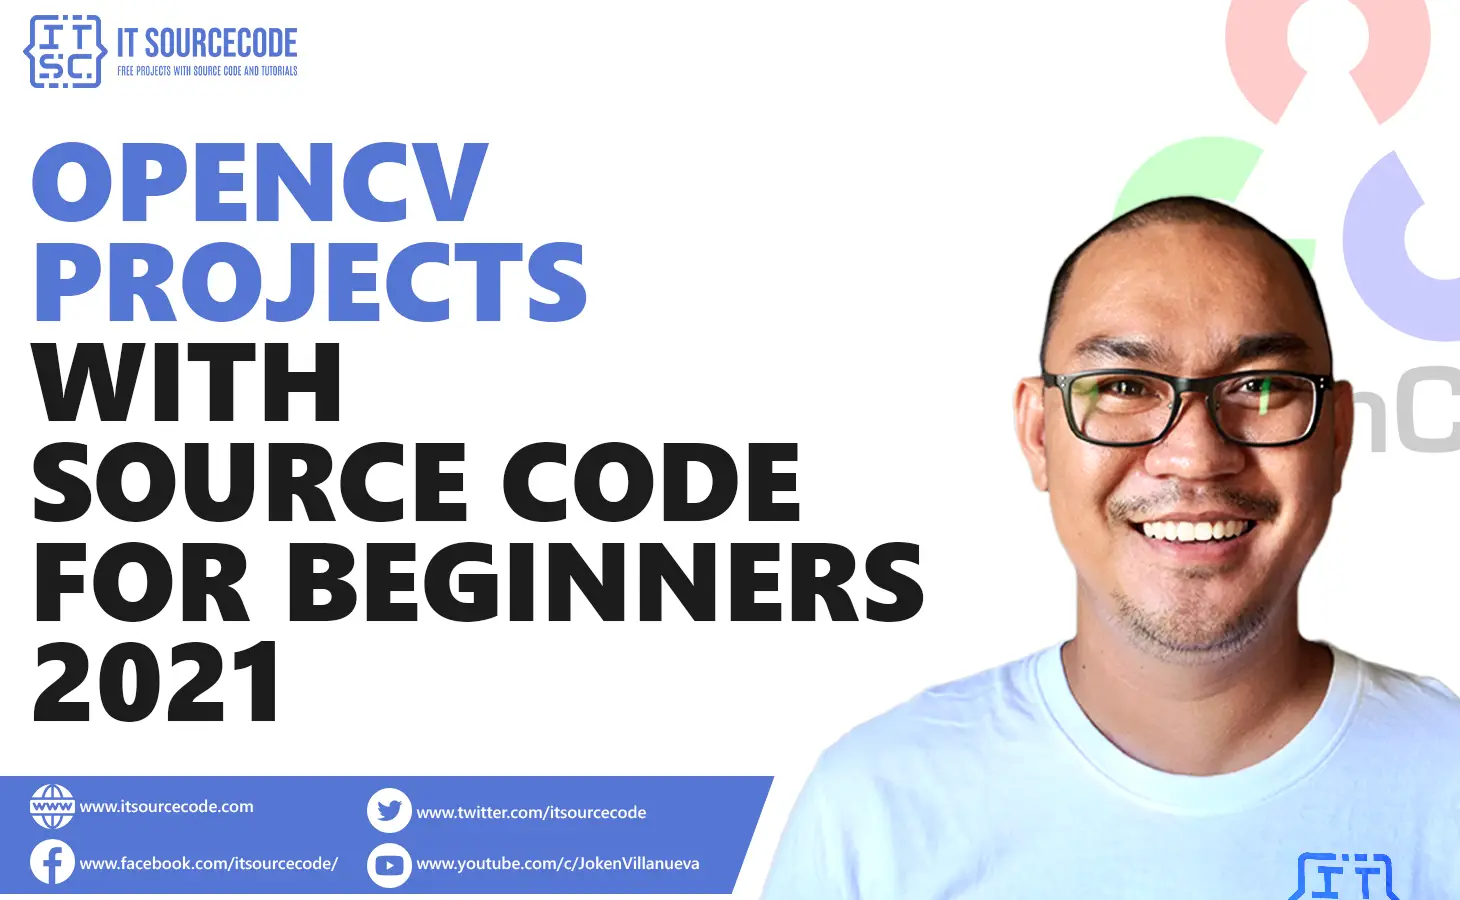 OpenCV Projects with Source Code For Beginners 2021